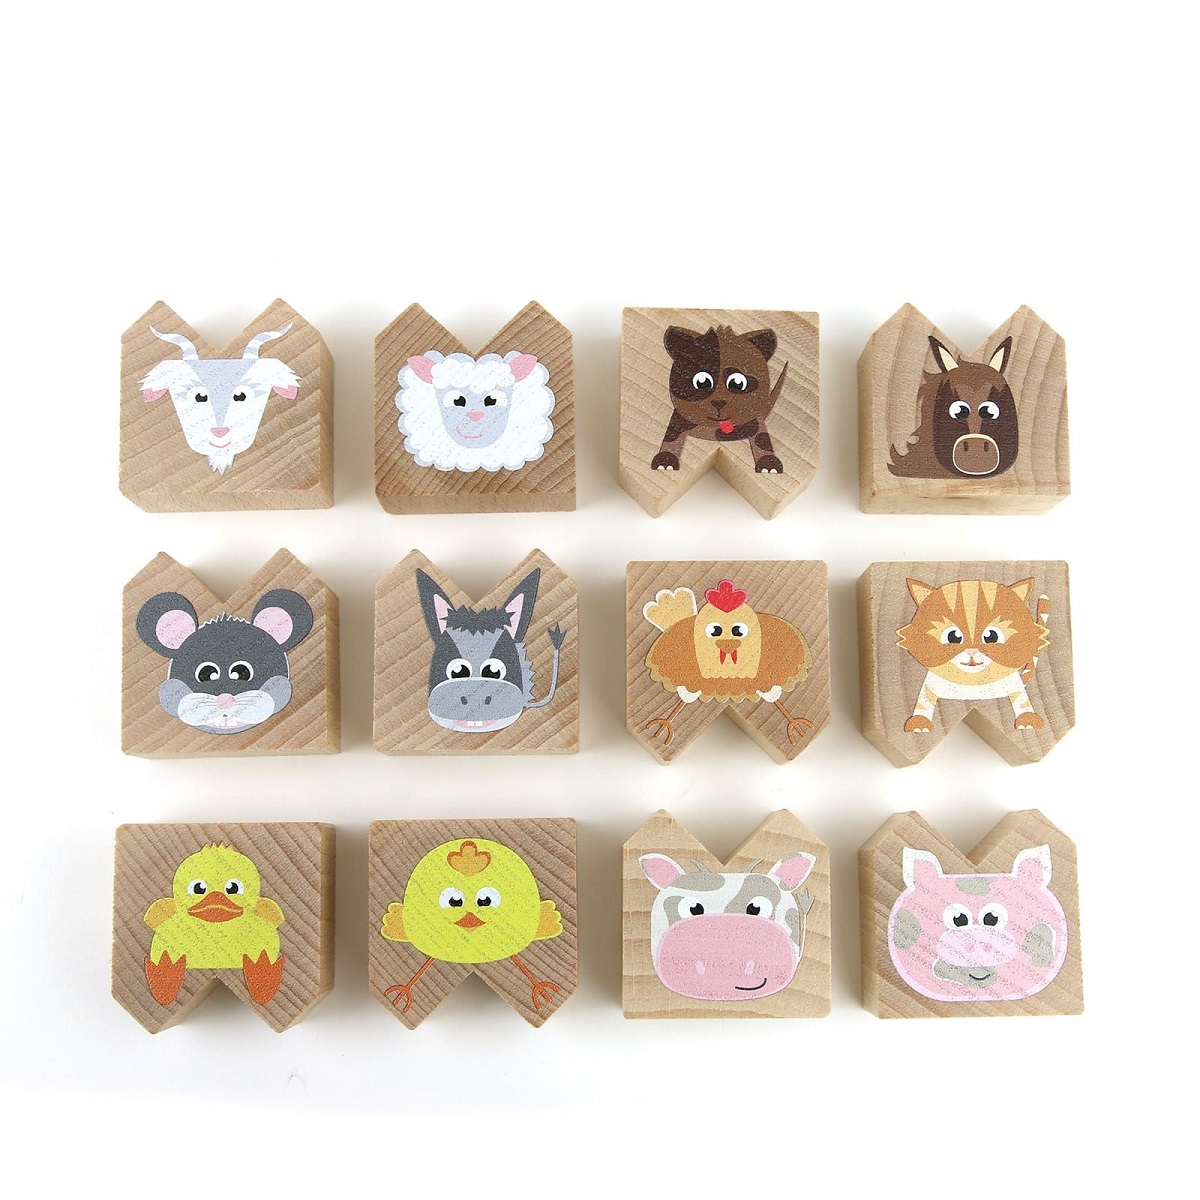 Milaniwood Game - Upside-Down Animals Farm WHILE QTY LAST 